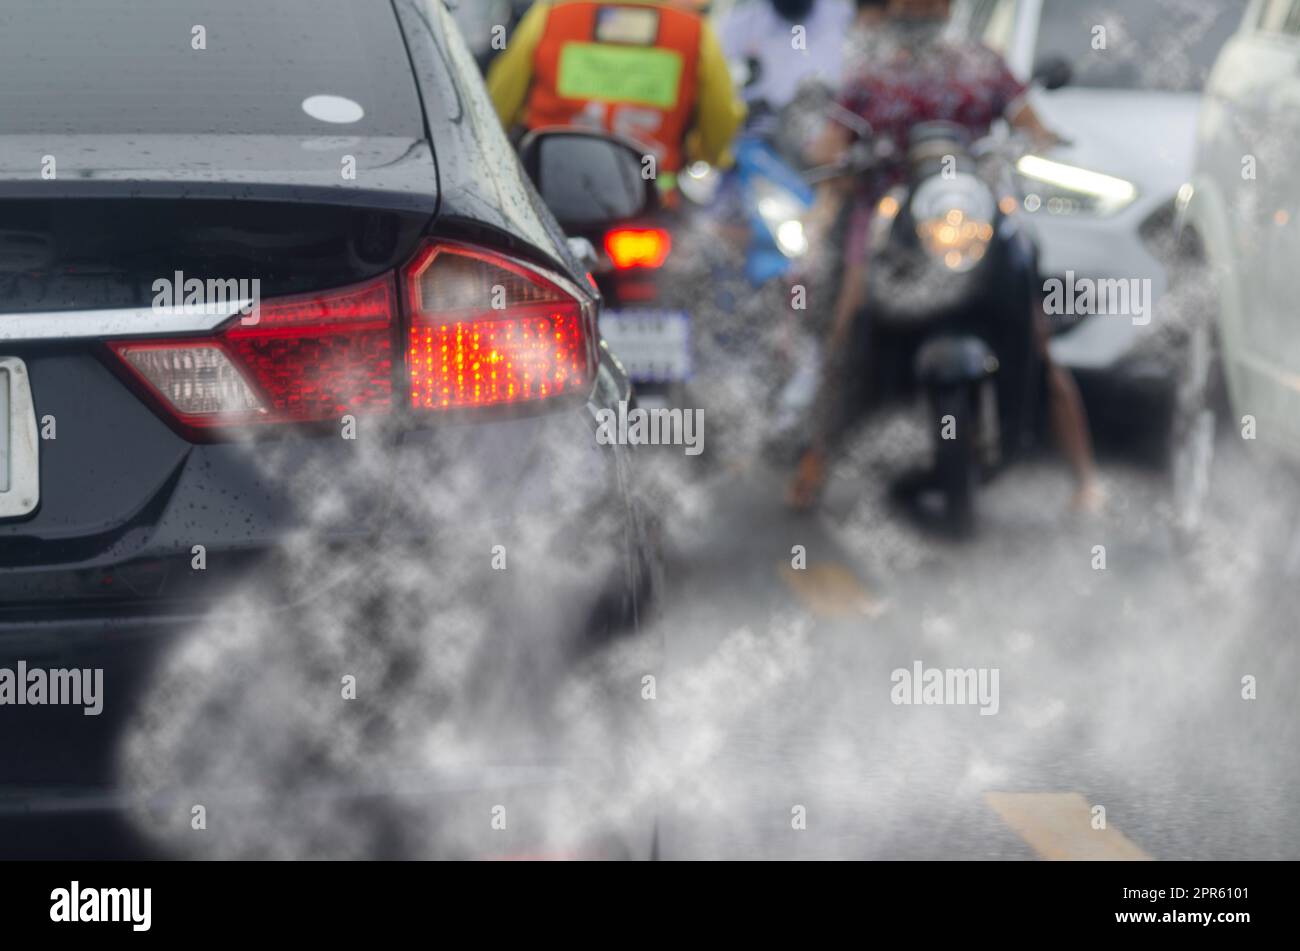 Smoke pollution from car exhaust pipes, traffic jams on the roads at rush hour. Stock Photo